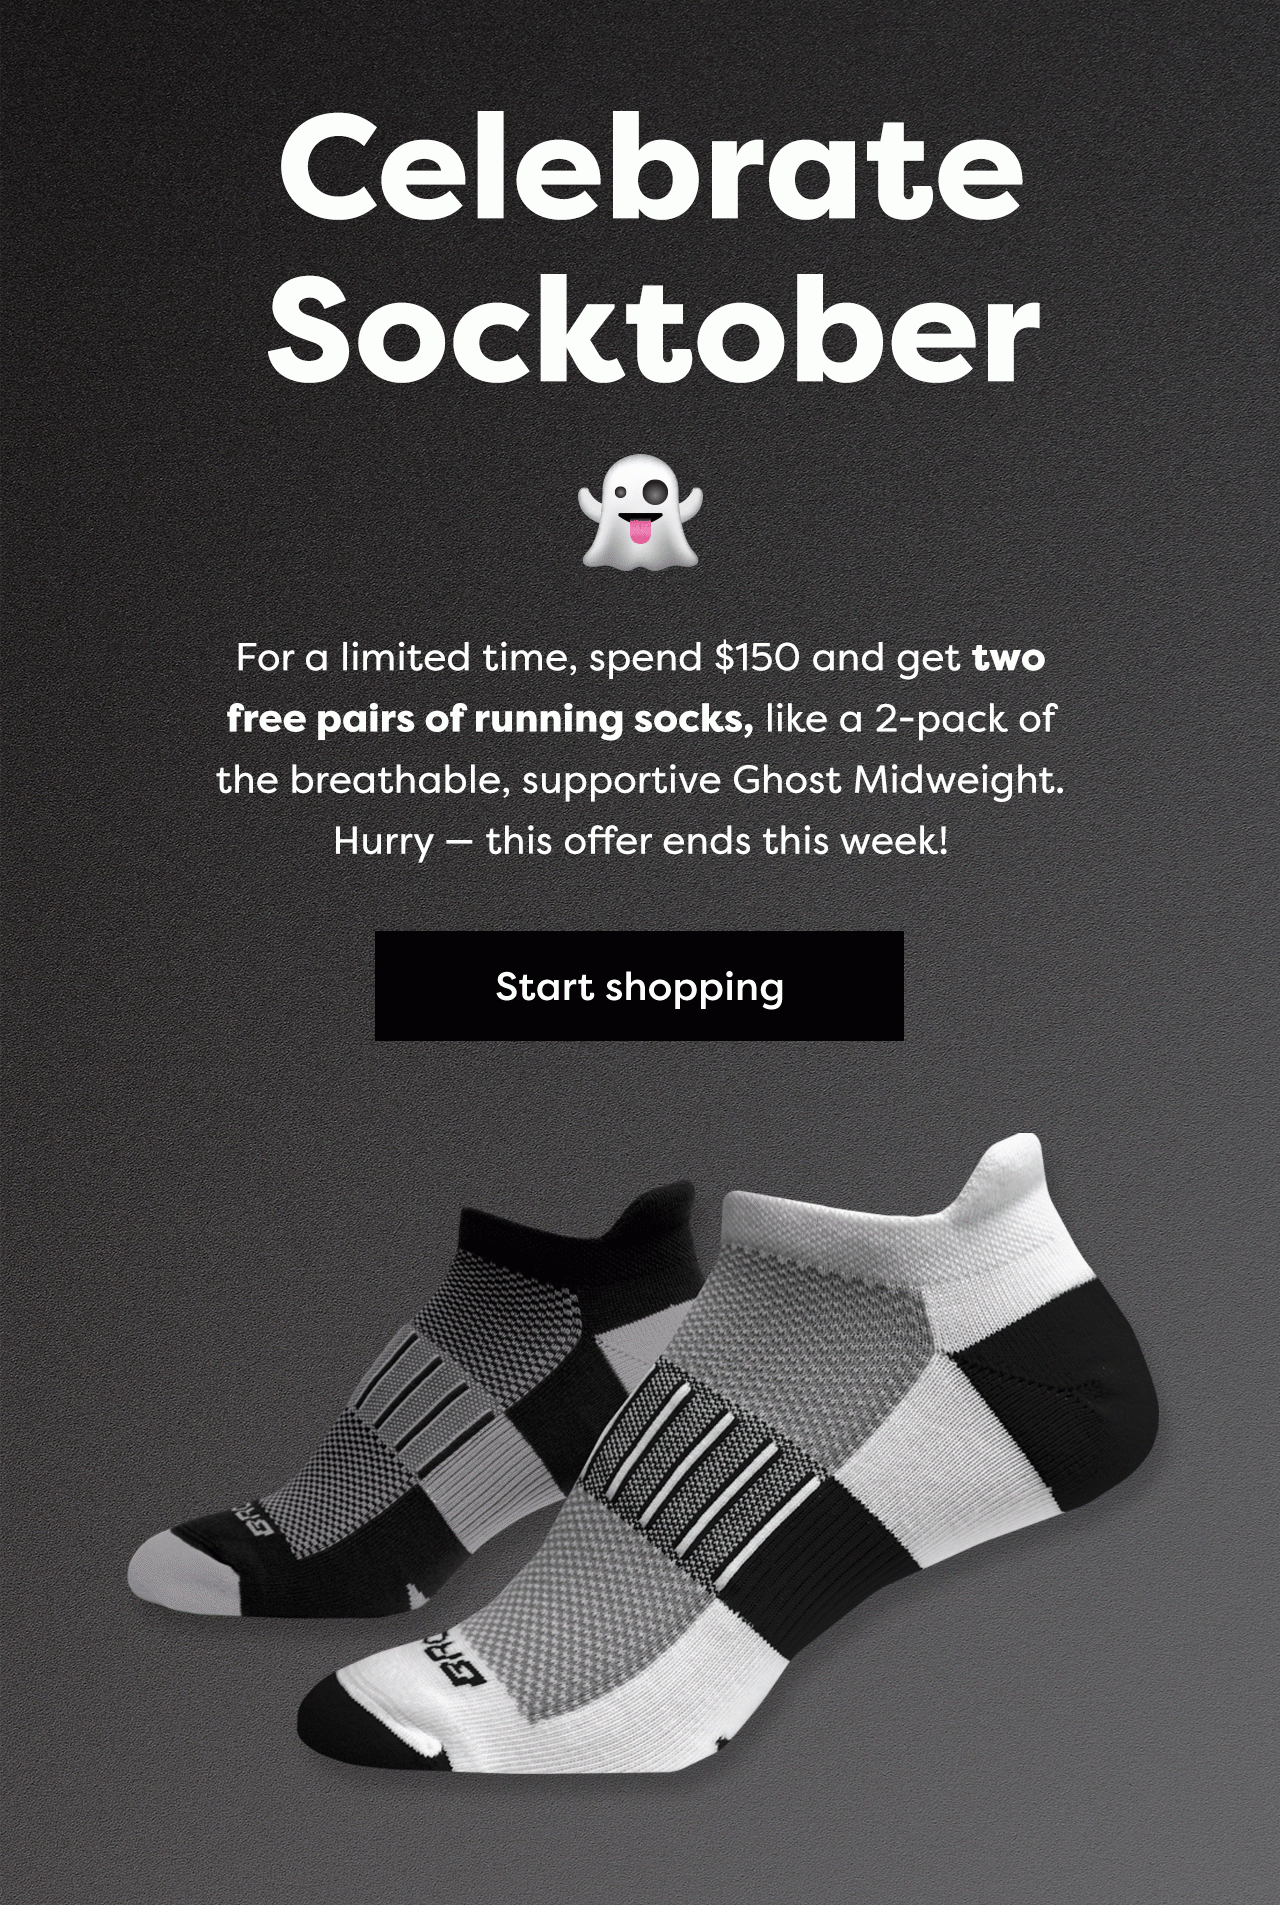 Celebrate Socktober - For a limited time, spend $150 and get two free pairs of running socks, like a 2-pack of the breathable, supportive Ghost Midweight. Hurry - this offer ends this week! | Start shopping